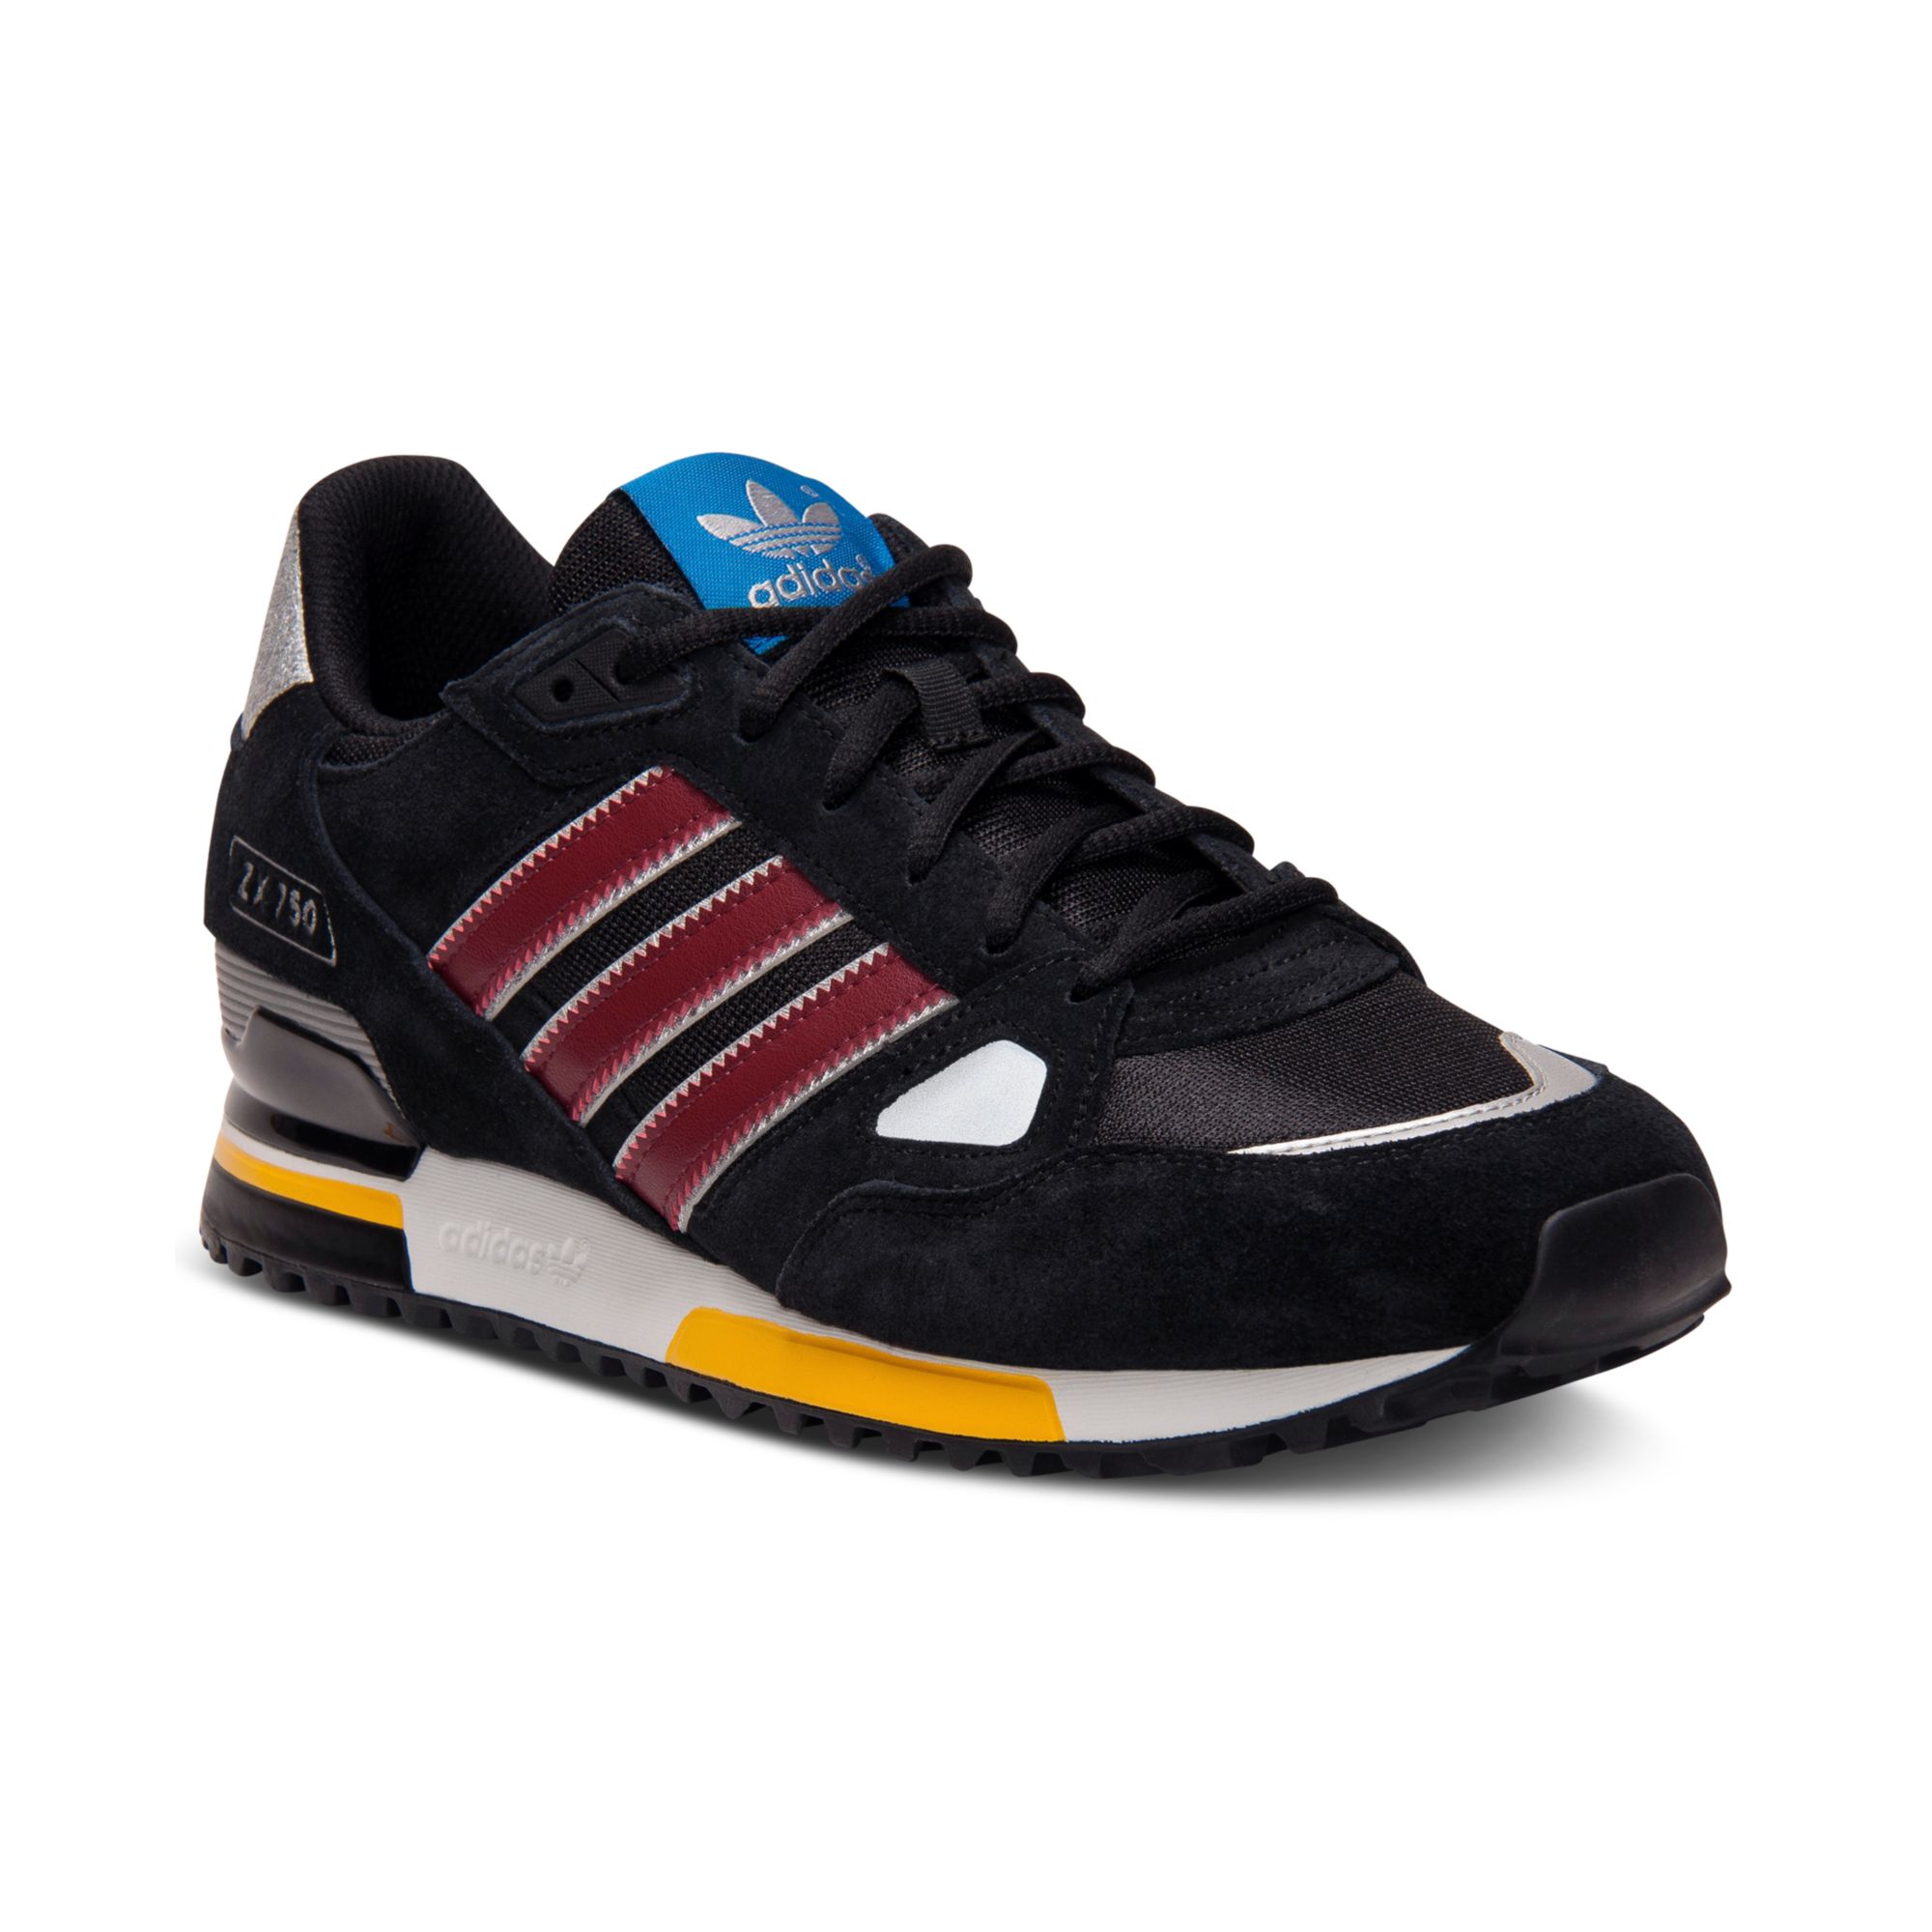 adidas Zx 750 Casual Sneakers in Black for Men - Lyst